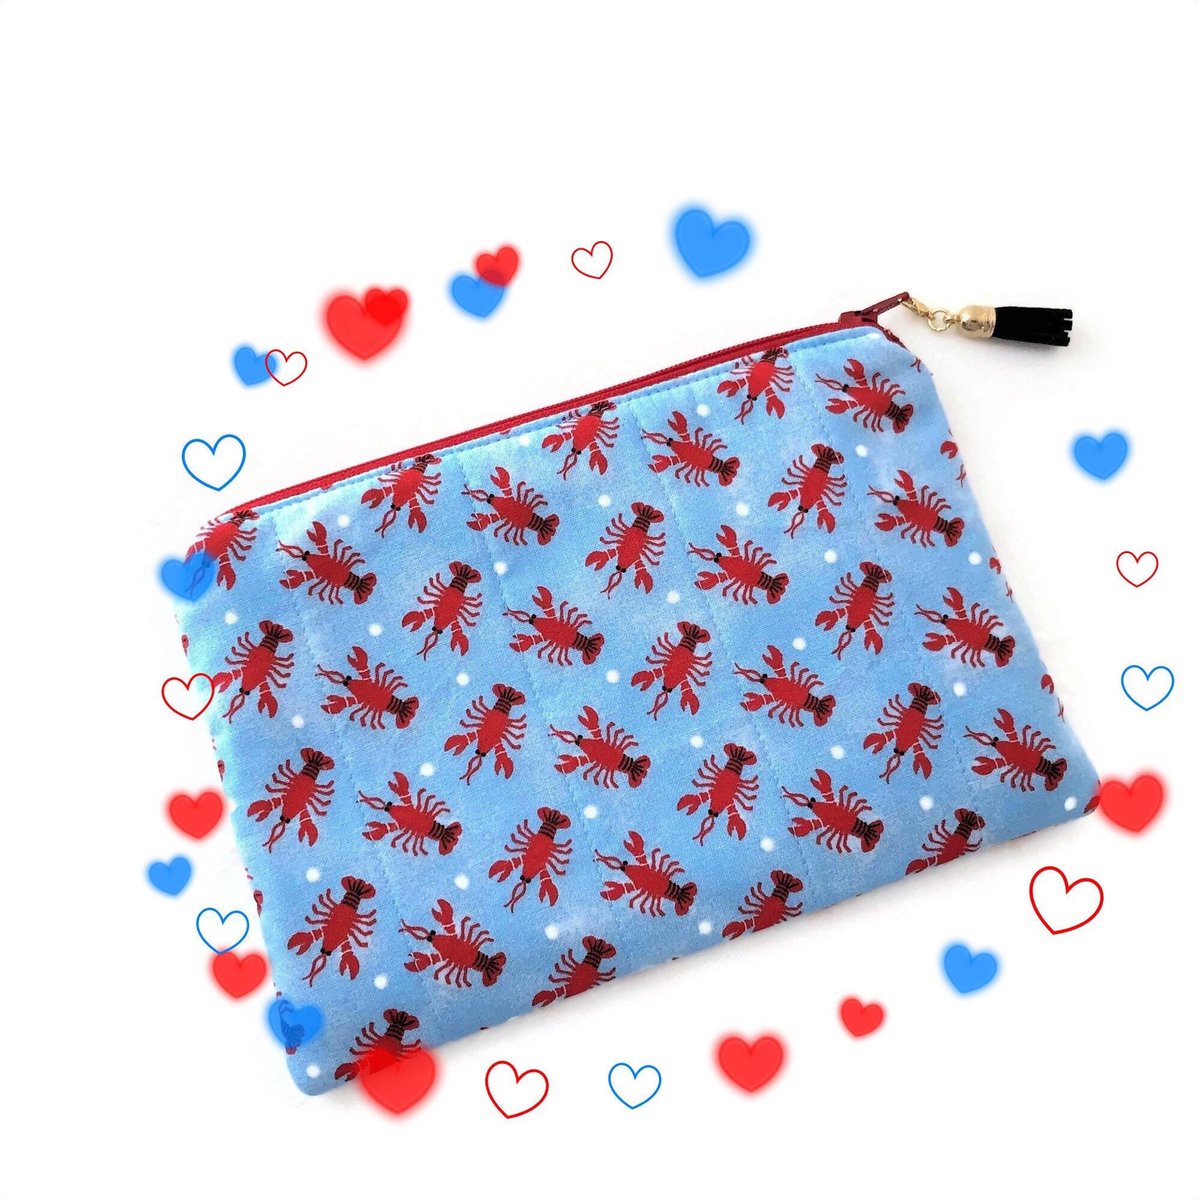 Excited to share this item from my #etsy shop: #cutepurse #lobsters #travelpouch #smallpurse etsy.me/3gibRXC